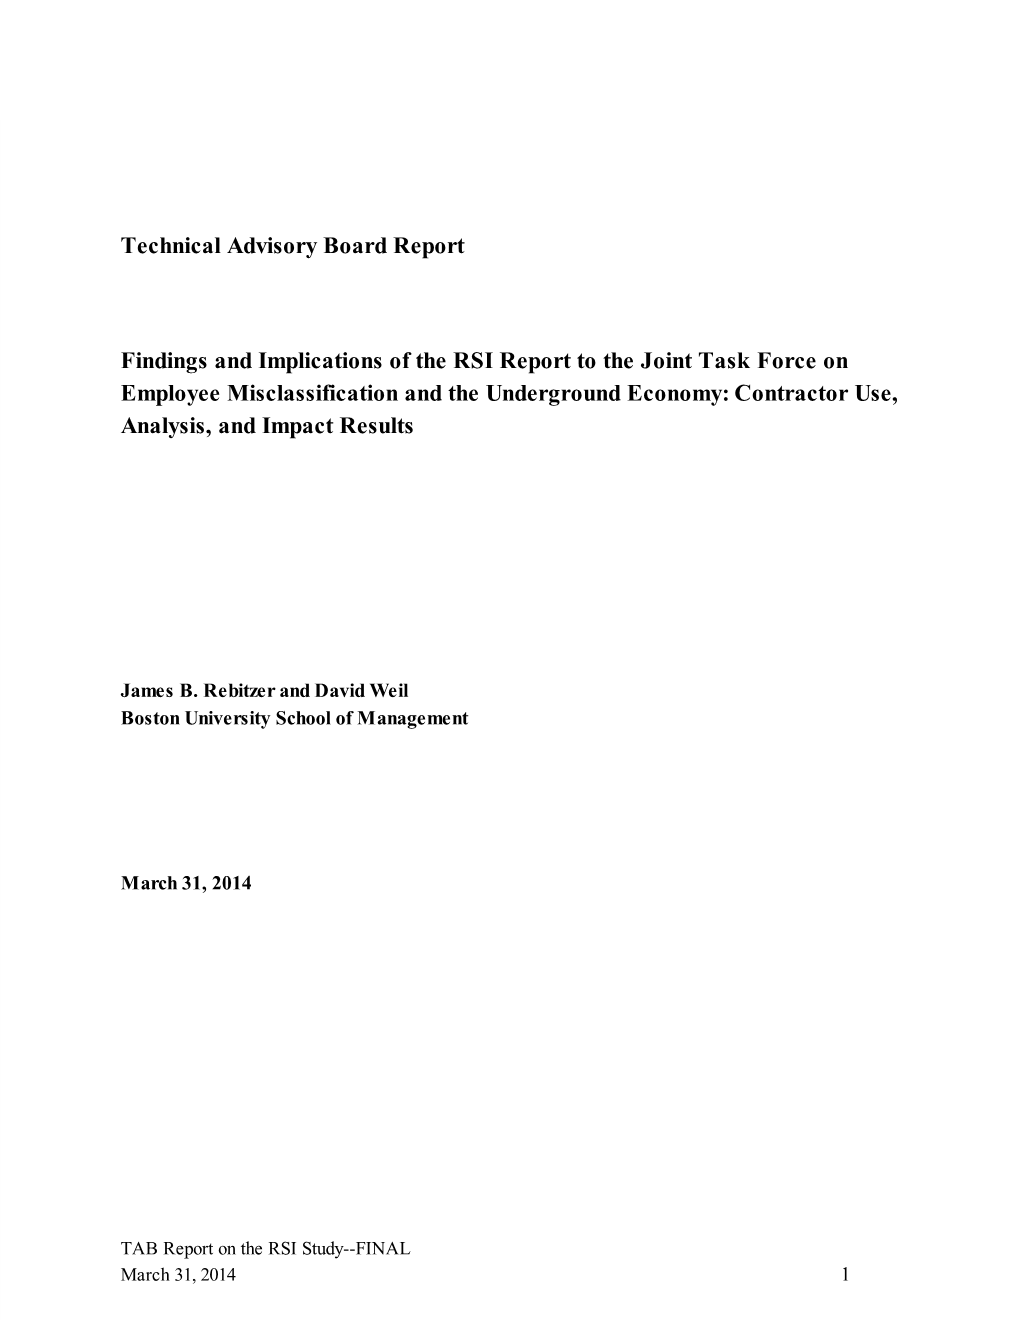 Technical Advisory Board Report Findings and Implications of the RSI Report to the Joint Task Force on Employee Misclassificatio